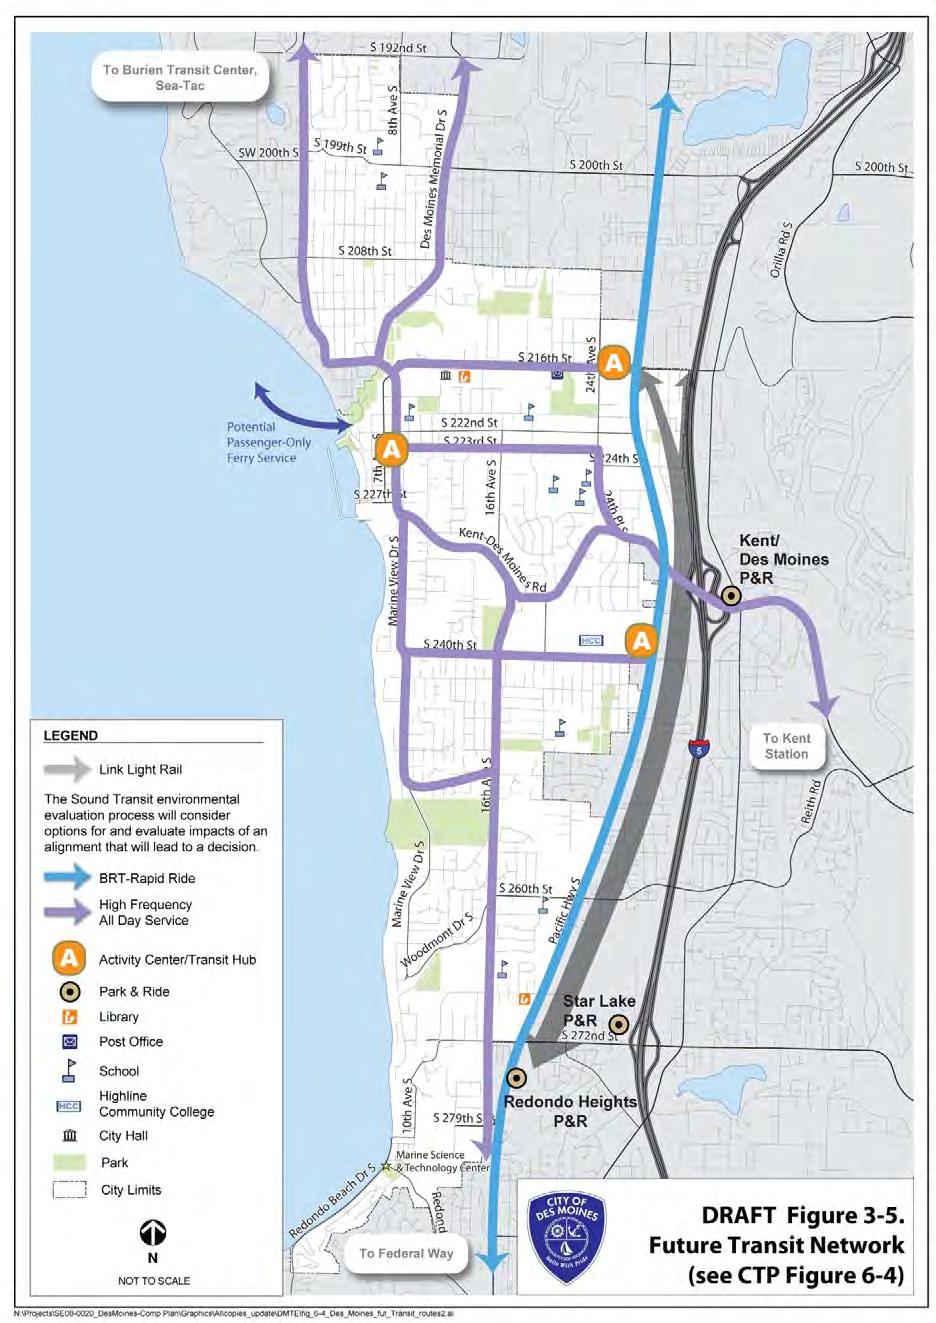 Review of Plans Pertinent to the Federal Way Transit Extension Source: City of Des Moines, 2009.